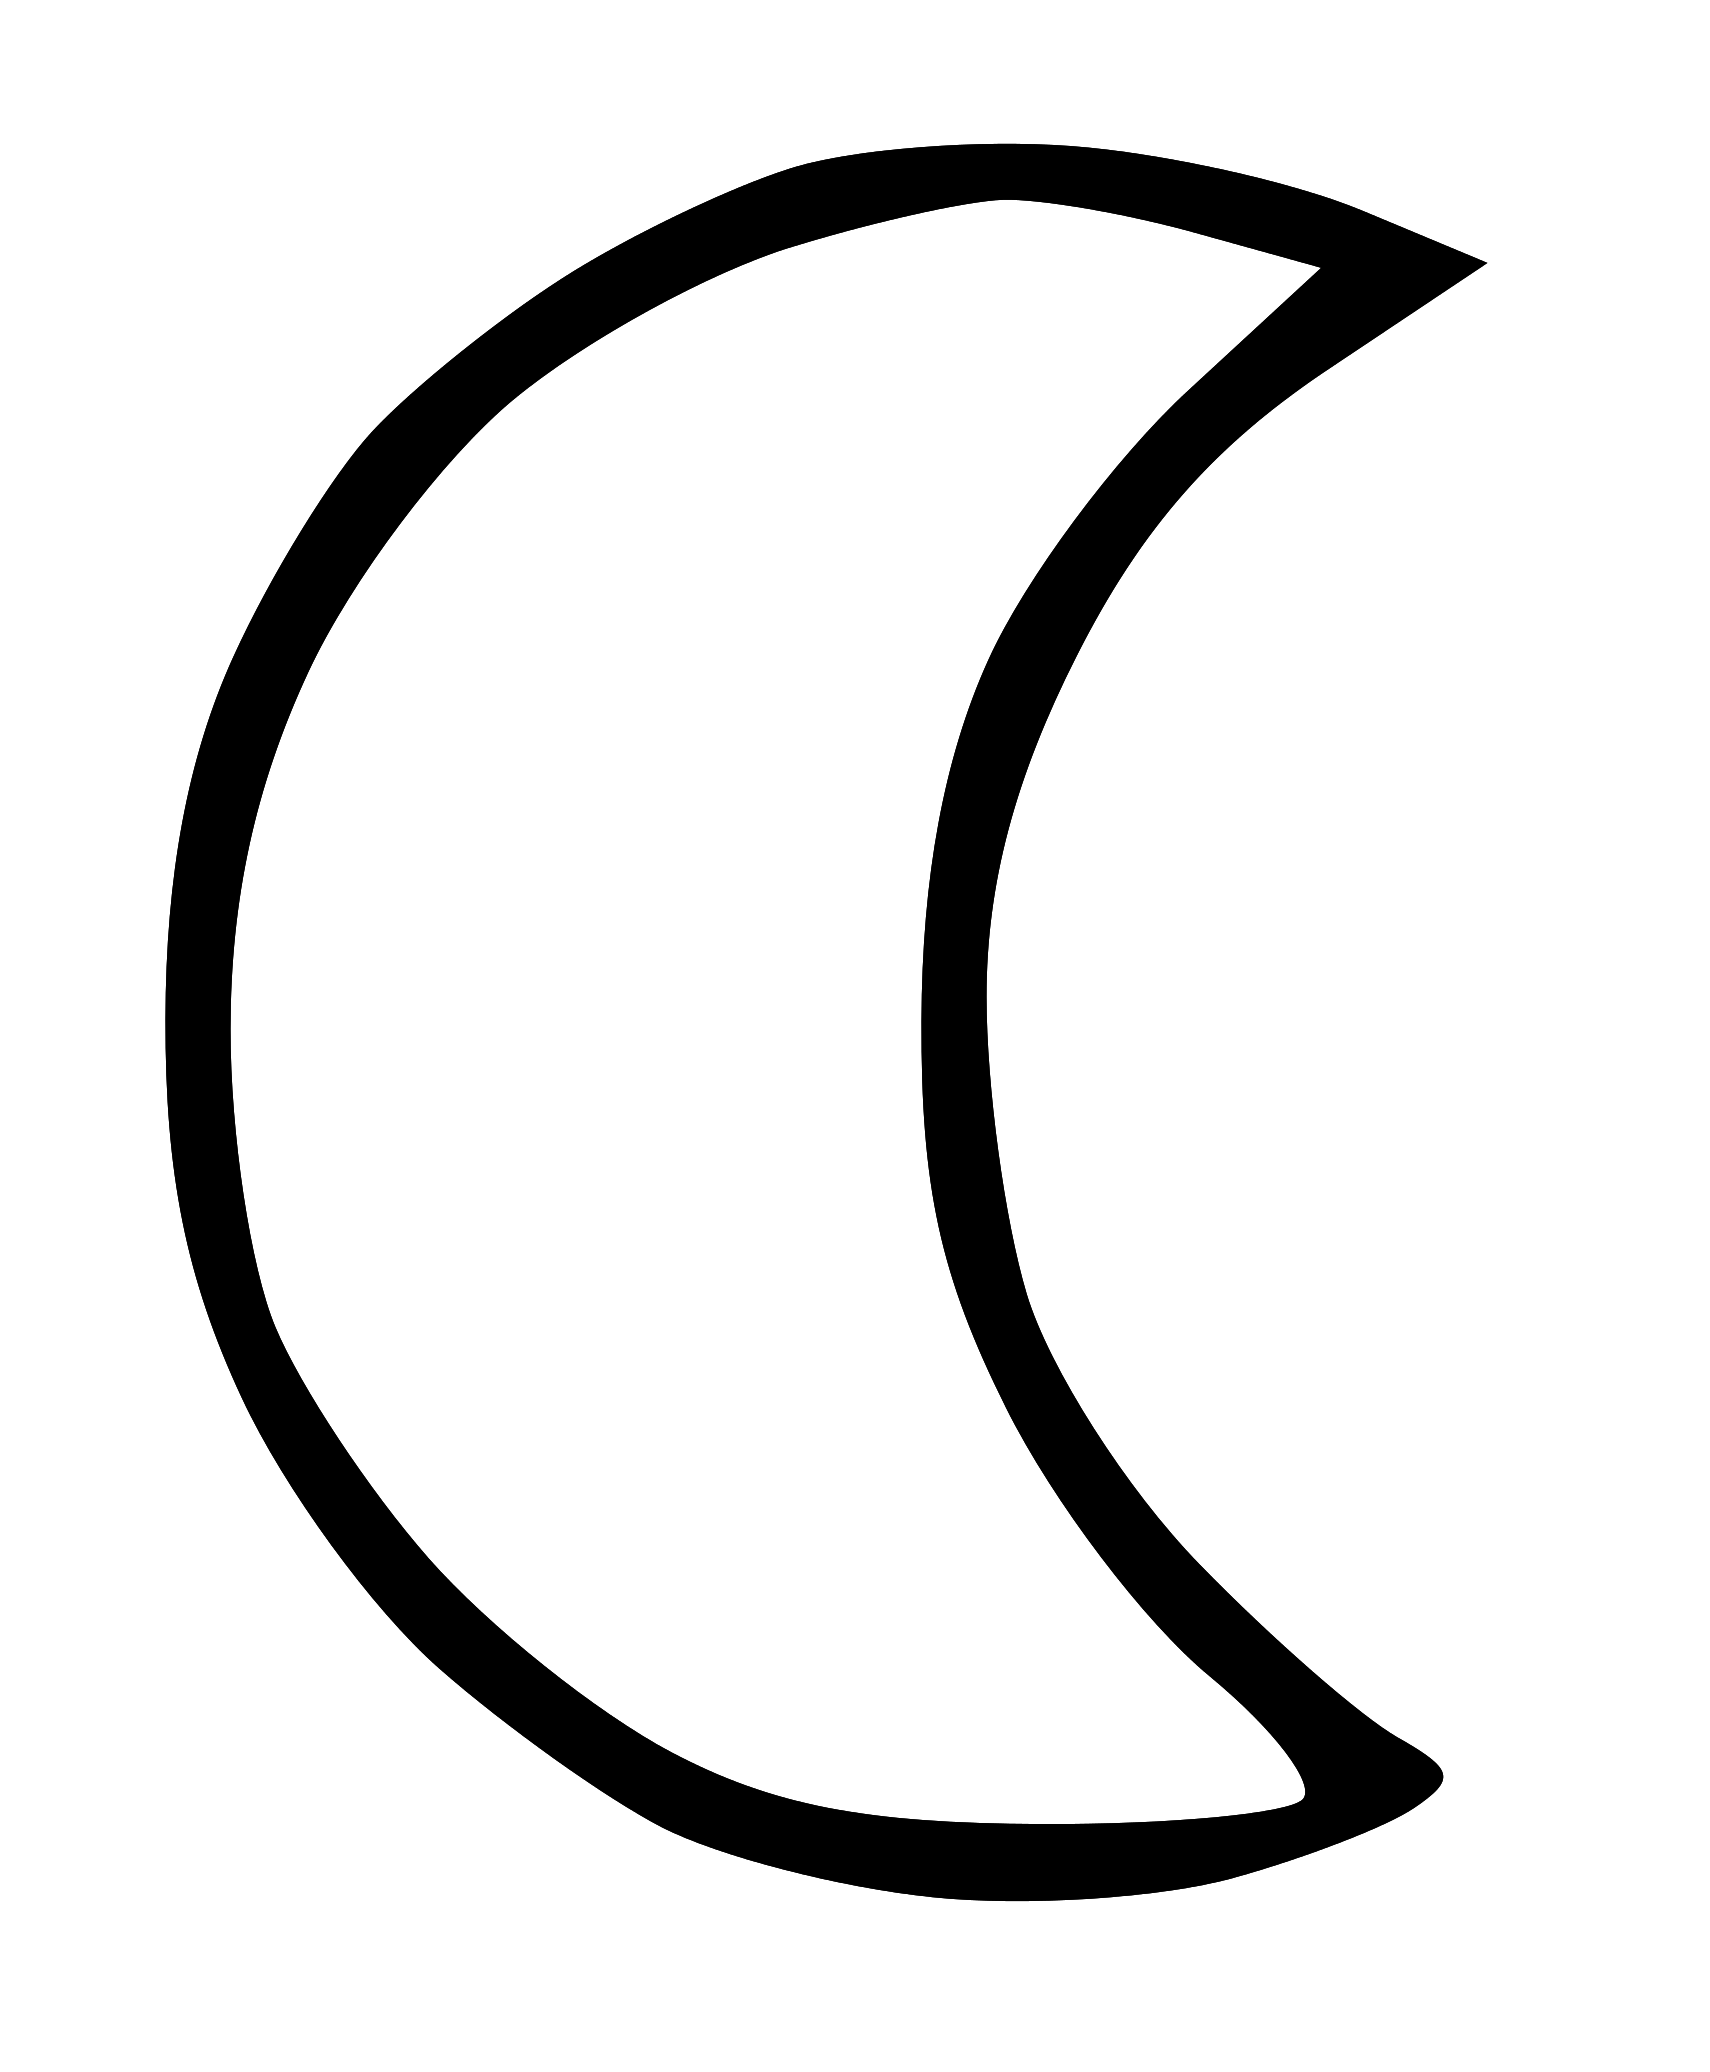 moon clipart black and white - photo #3